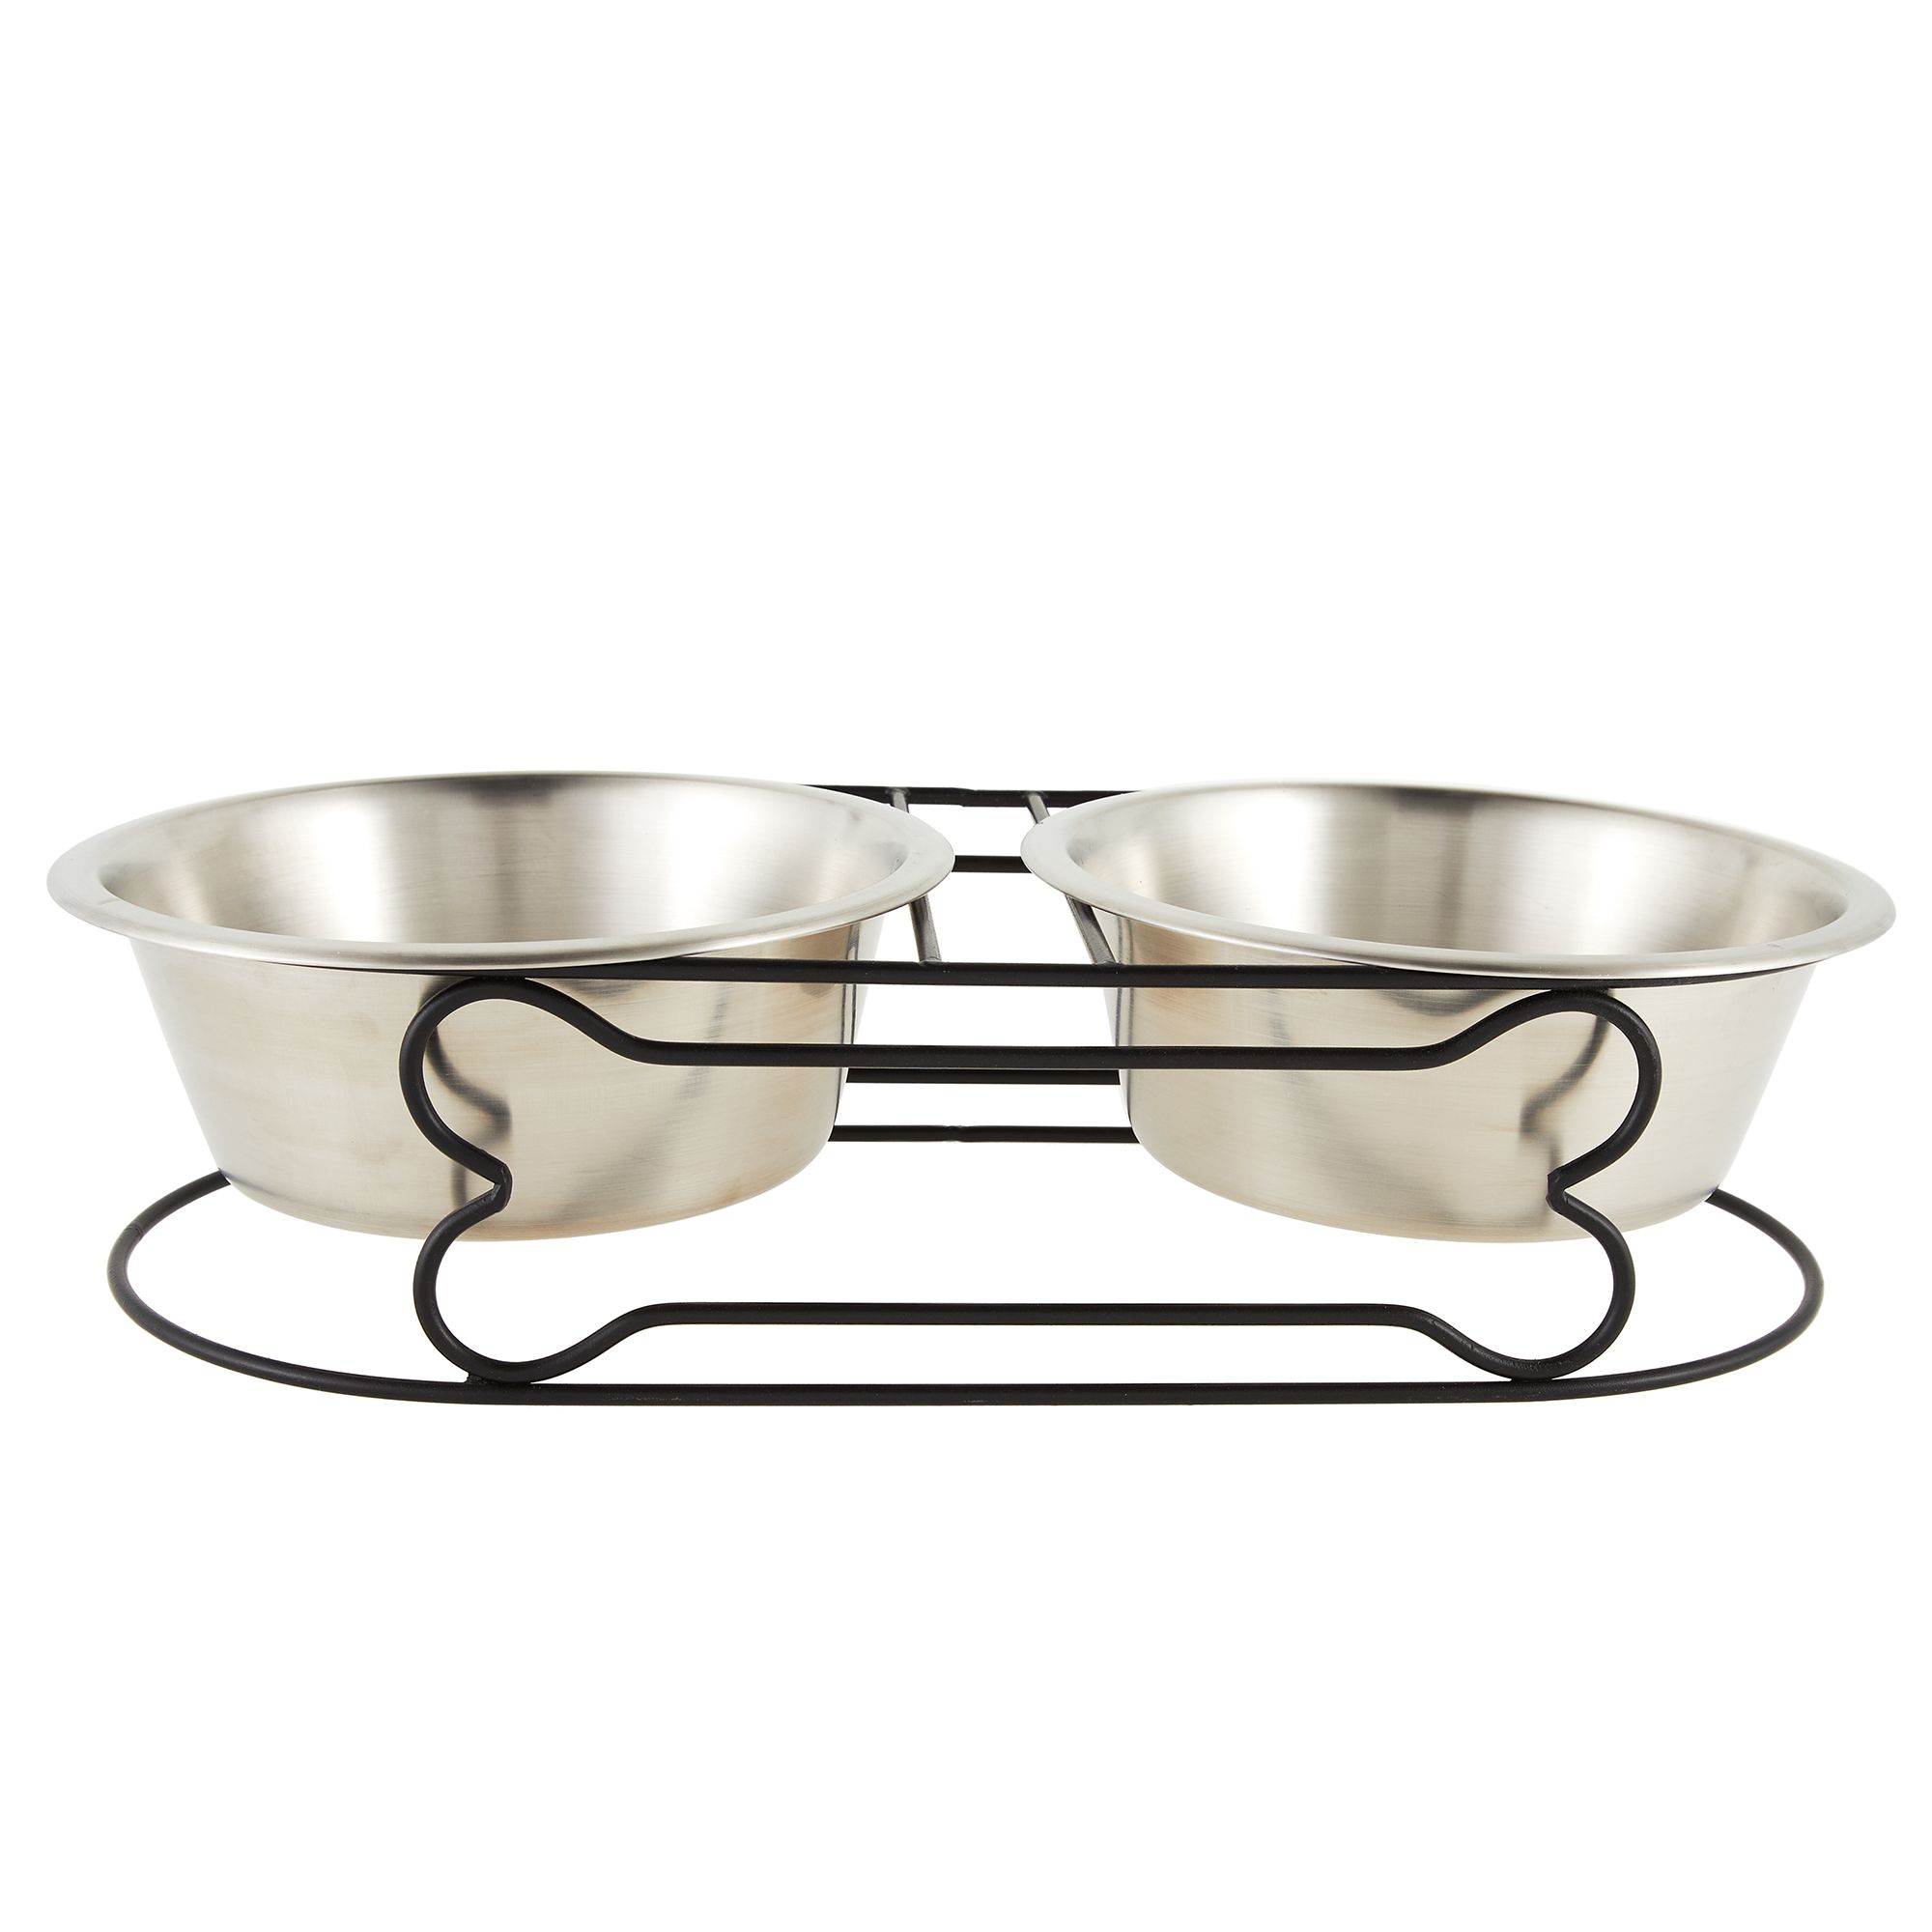 Elevated Dog Bowl with Double Stainless Steel Bowl and Waterproof Plate ,  Rustic Wooden Dog Dish Stand for Medium To Large Dogs and Cats. Do-Over  Color 